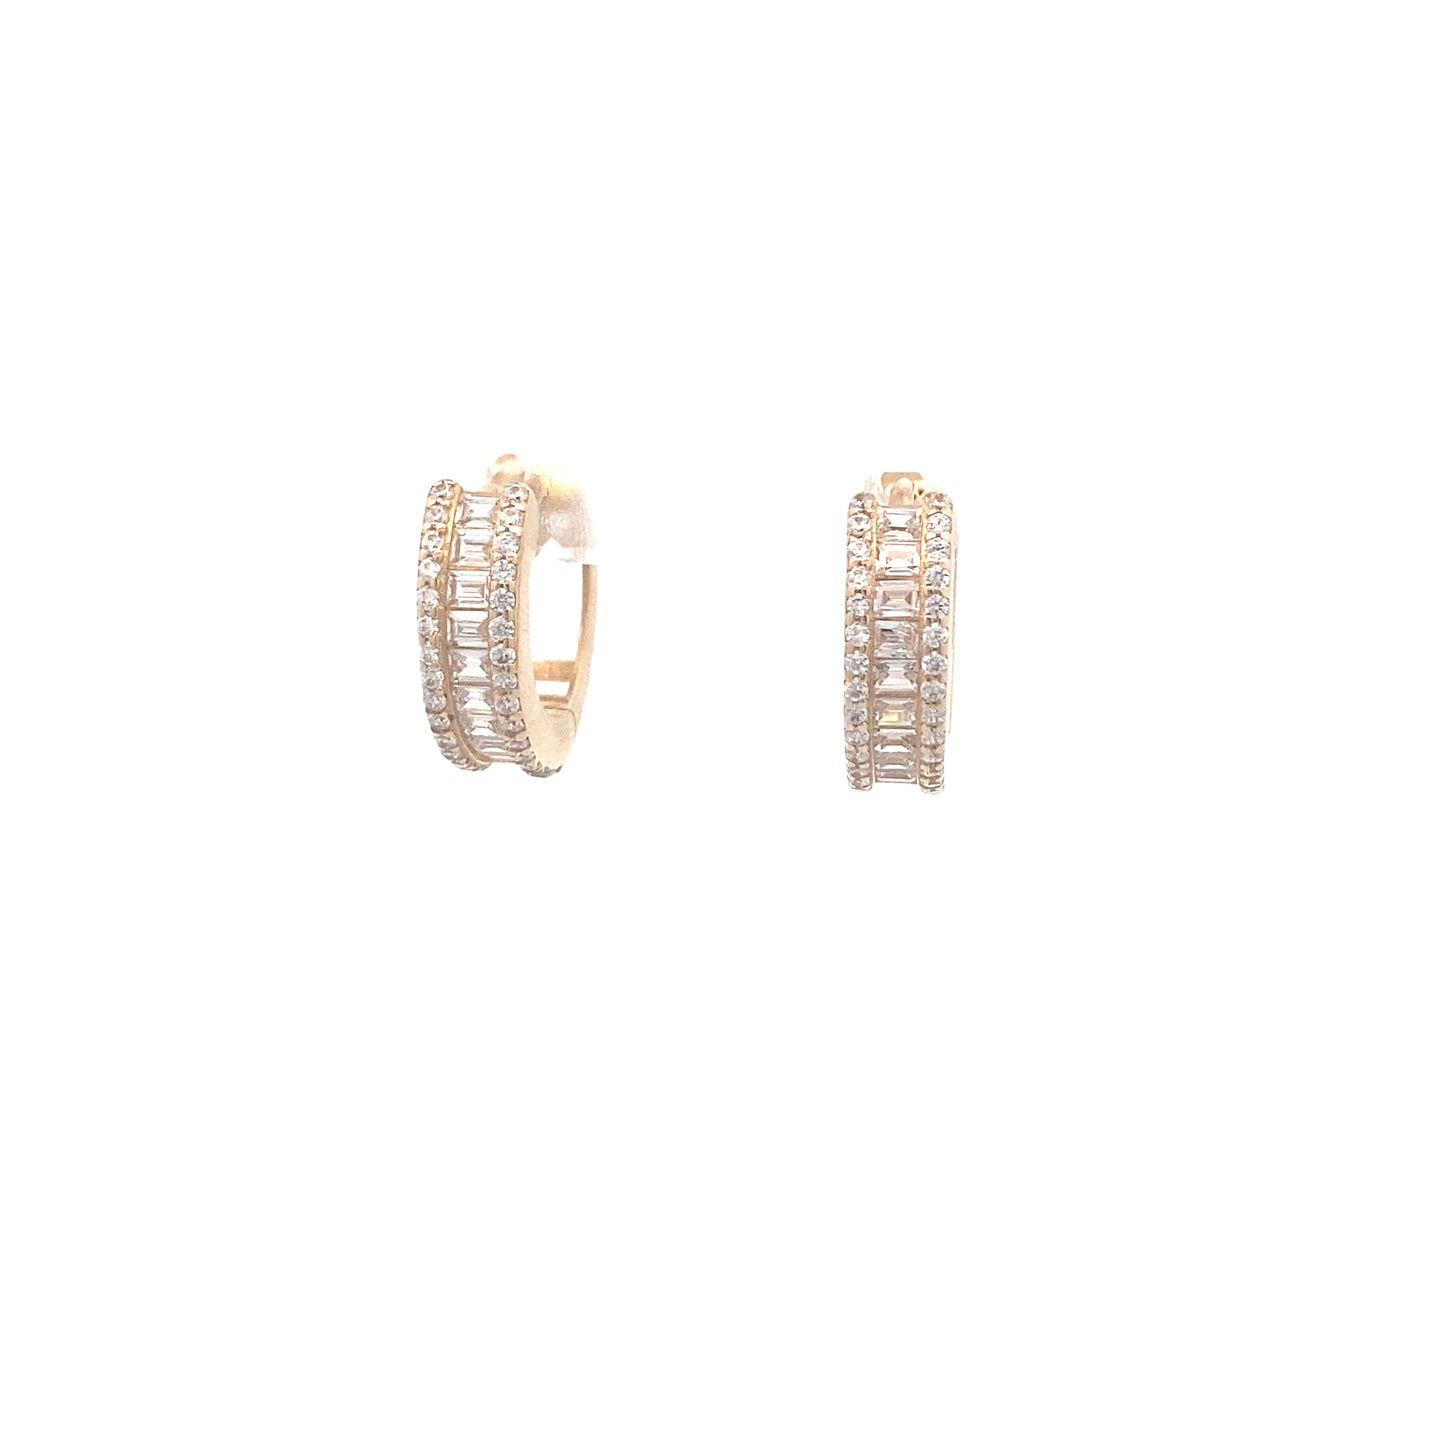 14K Gold Earrings with Baguette CZ | Luby Gold Collection | Luby 